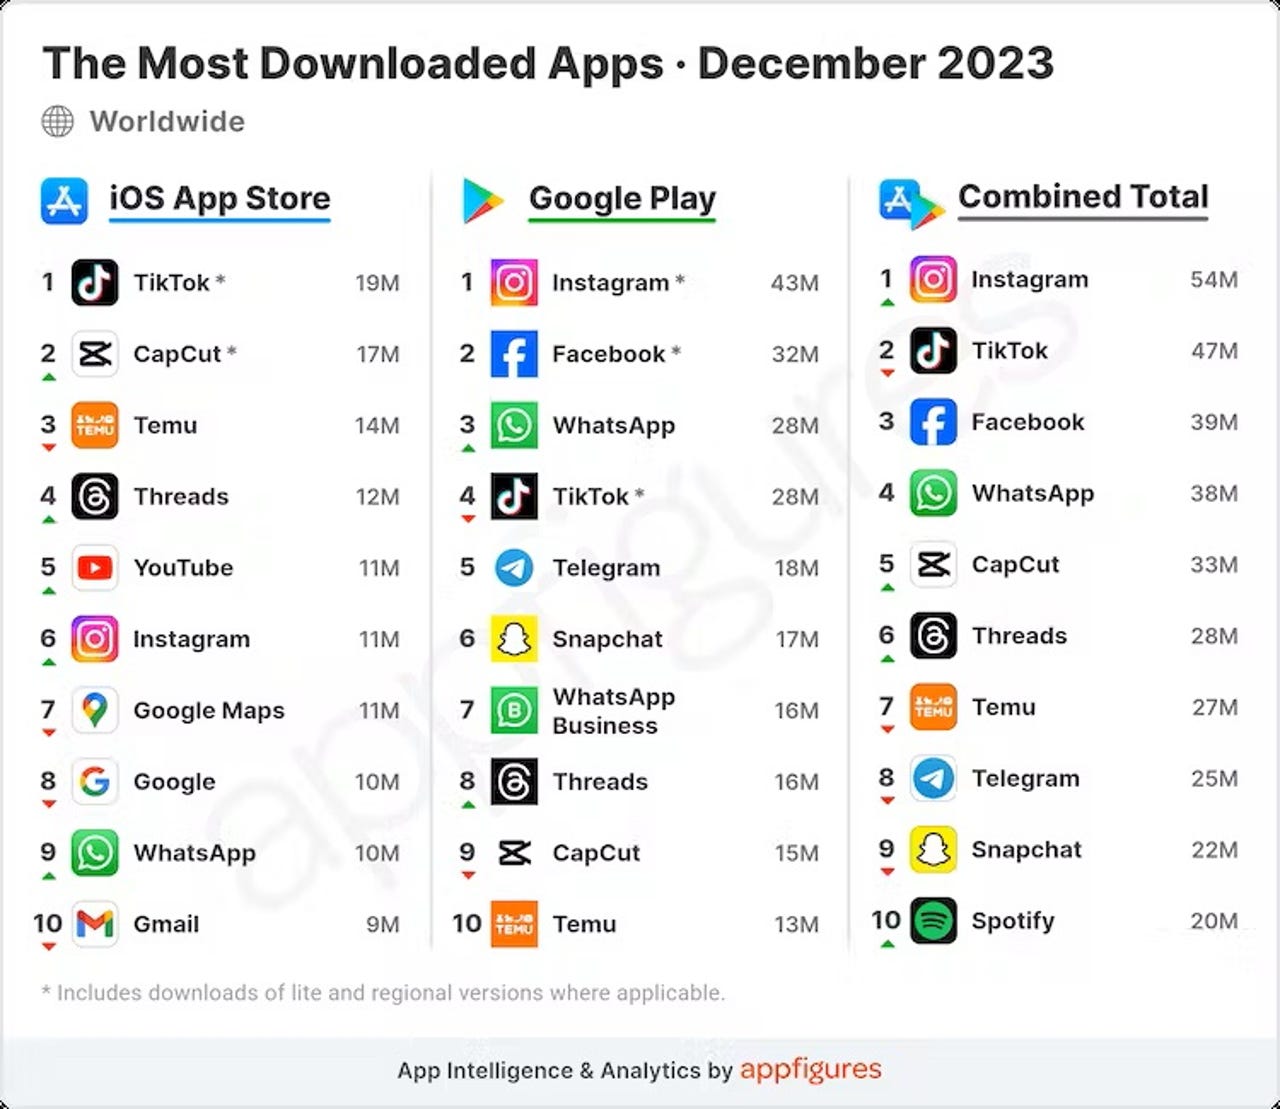 The most downloaded apps in December 2023